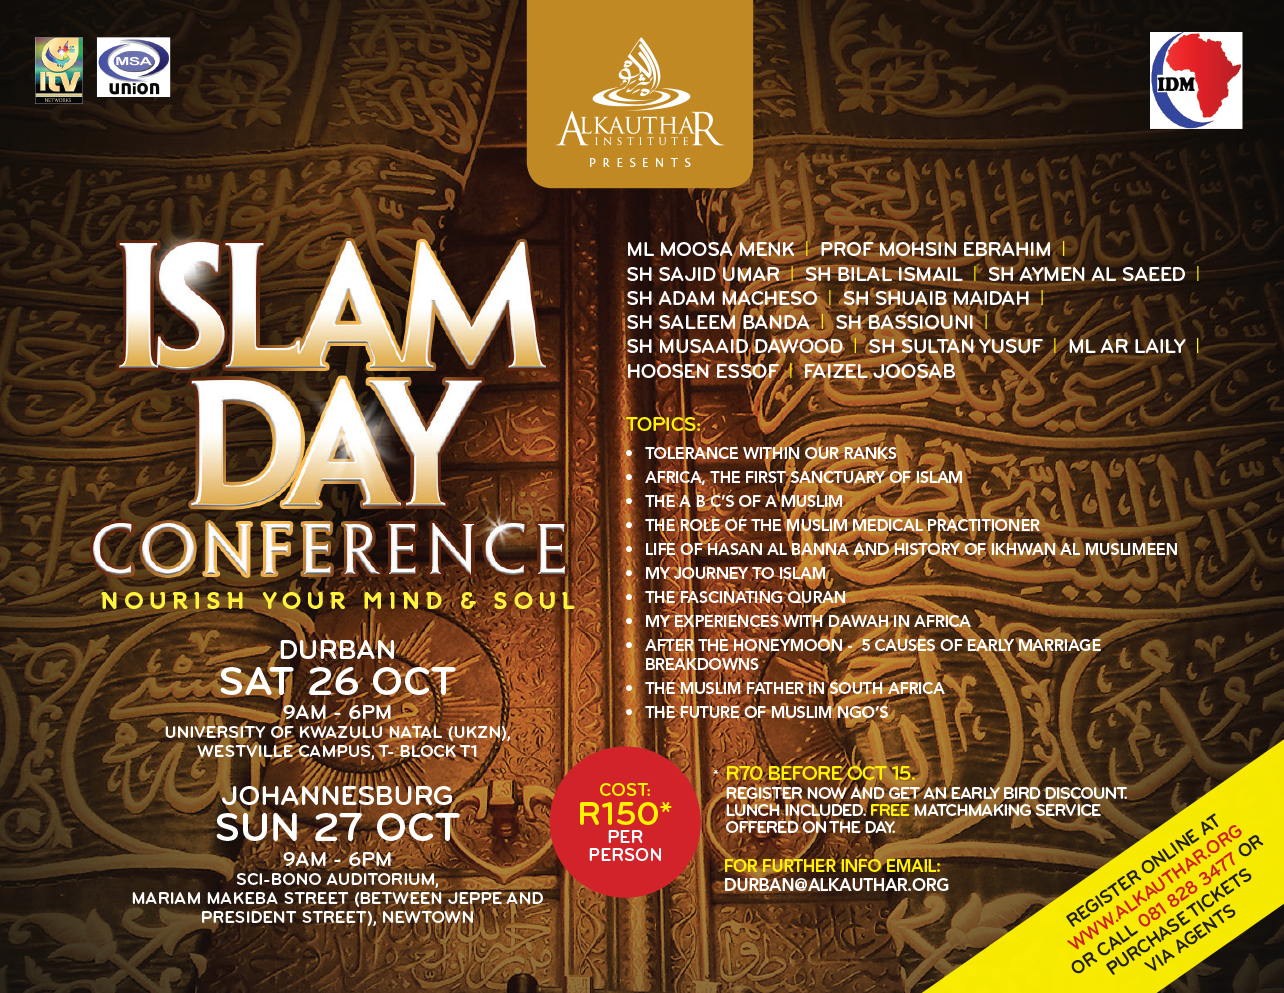 Islam Day Conference 2013